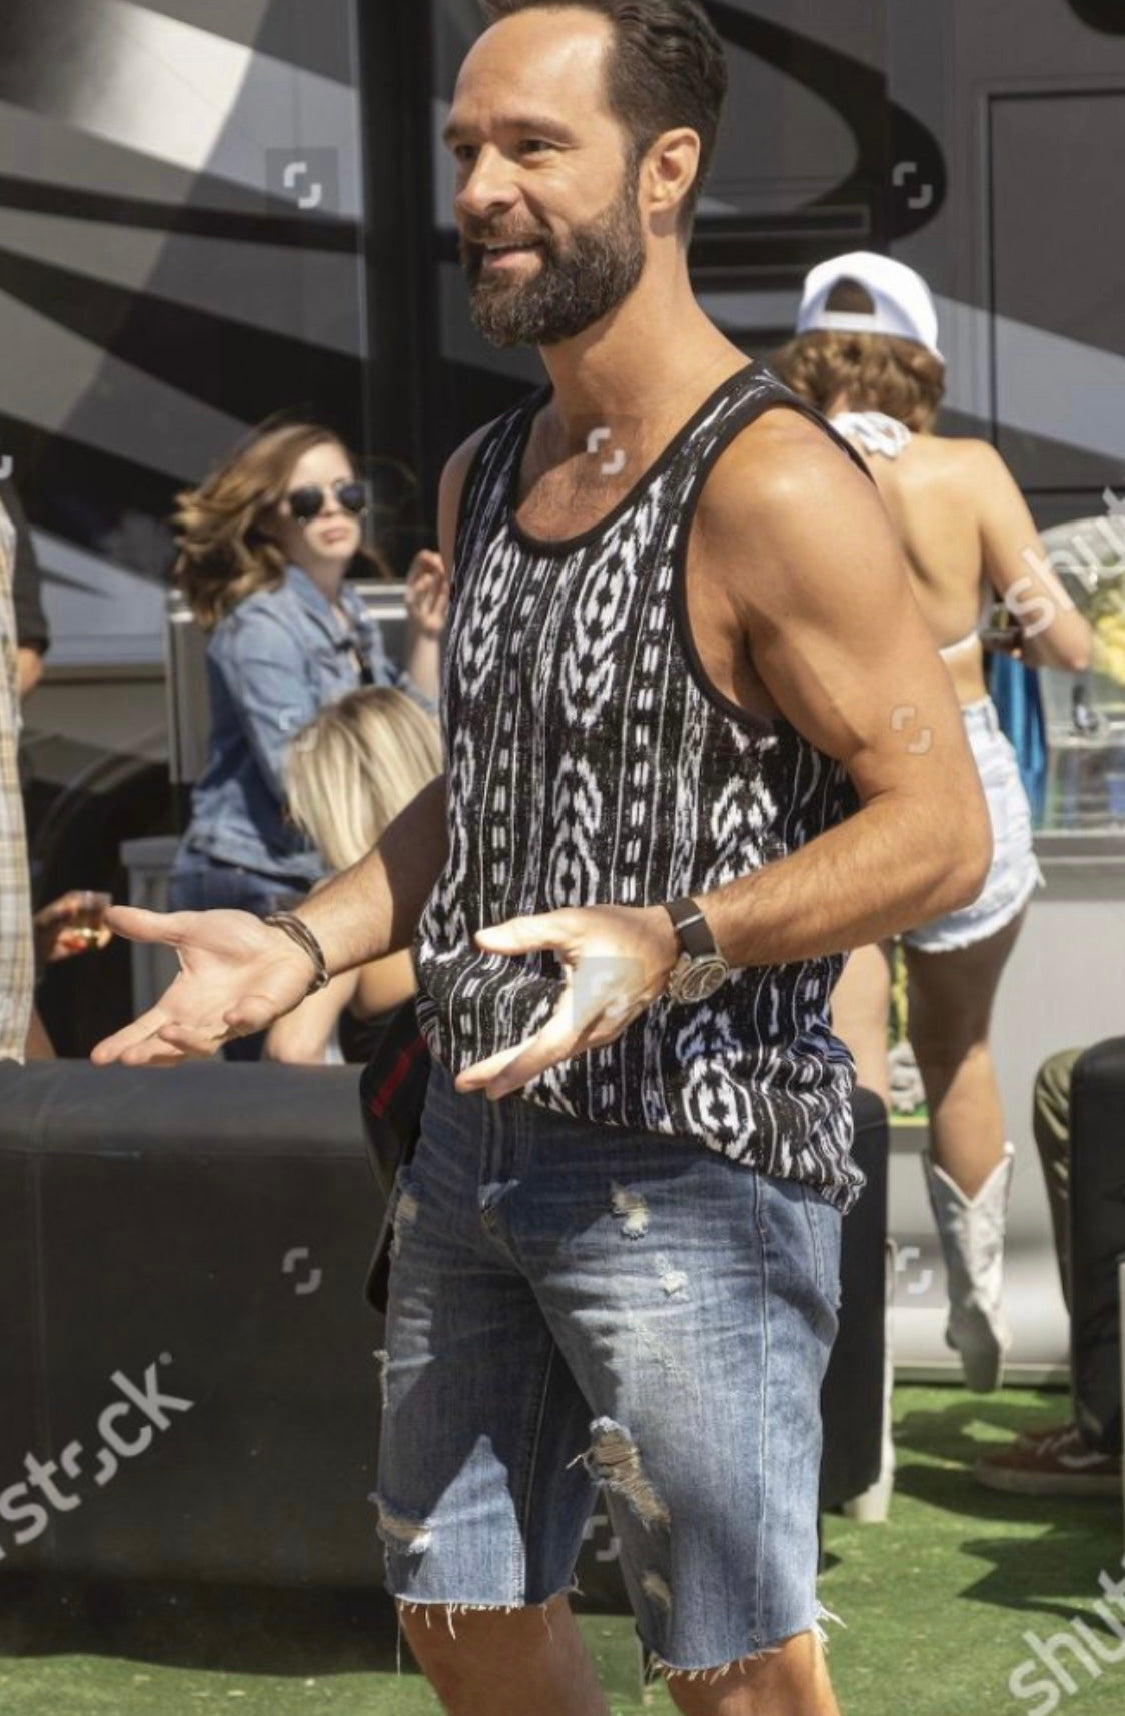 Silicon Valley: Russ Hanneman's White Tank Top and BLANKNYC Denim Jean Shorts from "RussFest"